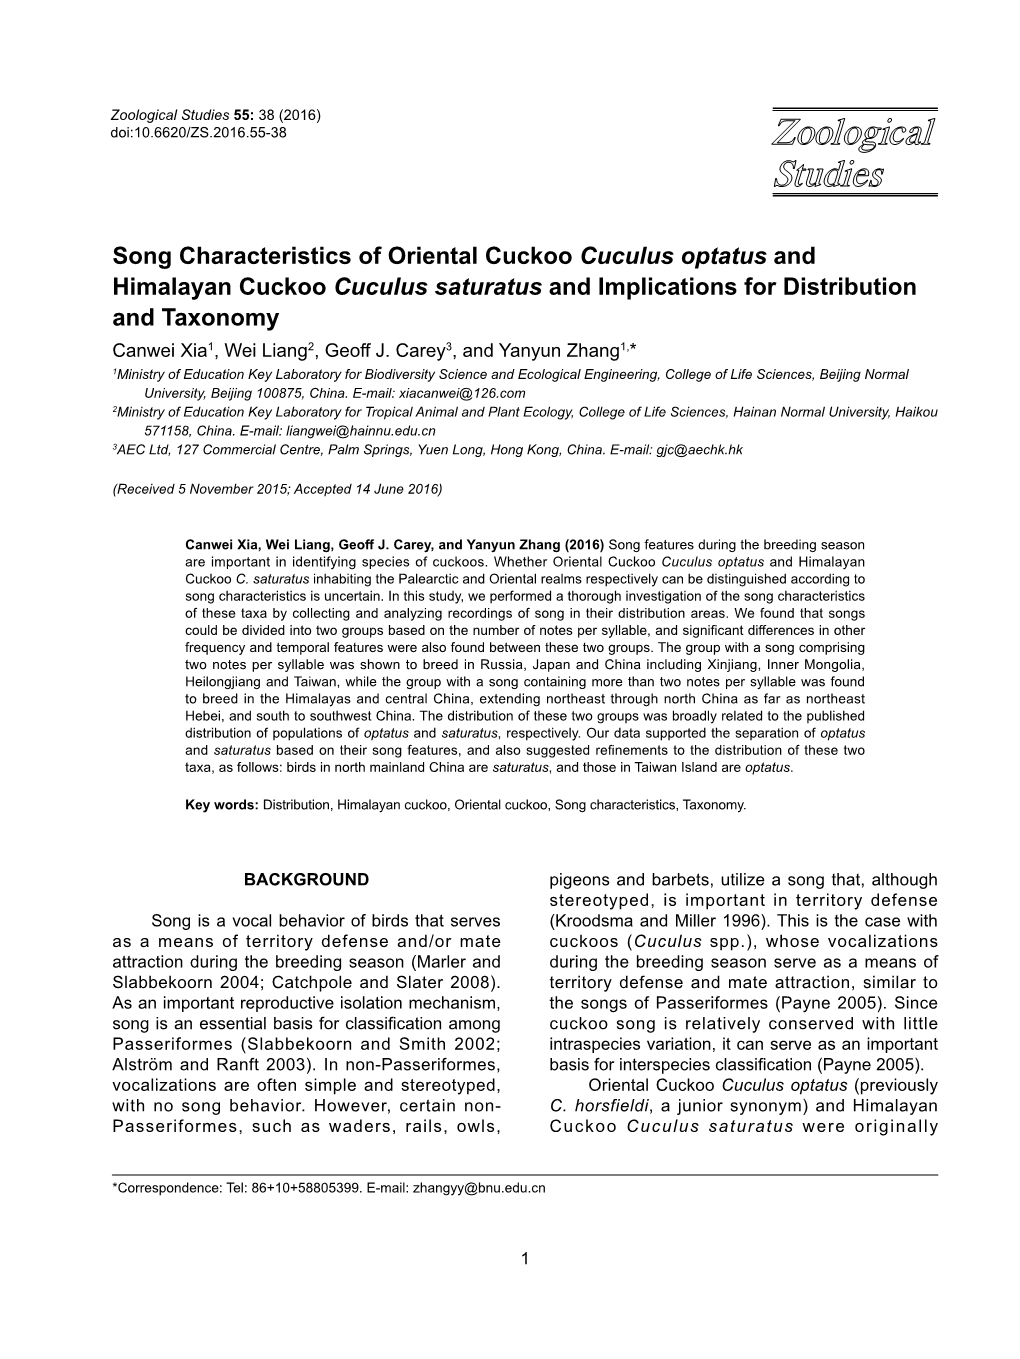 Song Characteristics of Oriental Cuckoo Cuculus Optatus and Himalayan Cuckoo Cuculus Saturatus and Implications for Distribution